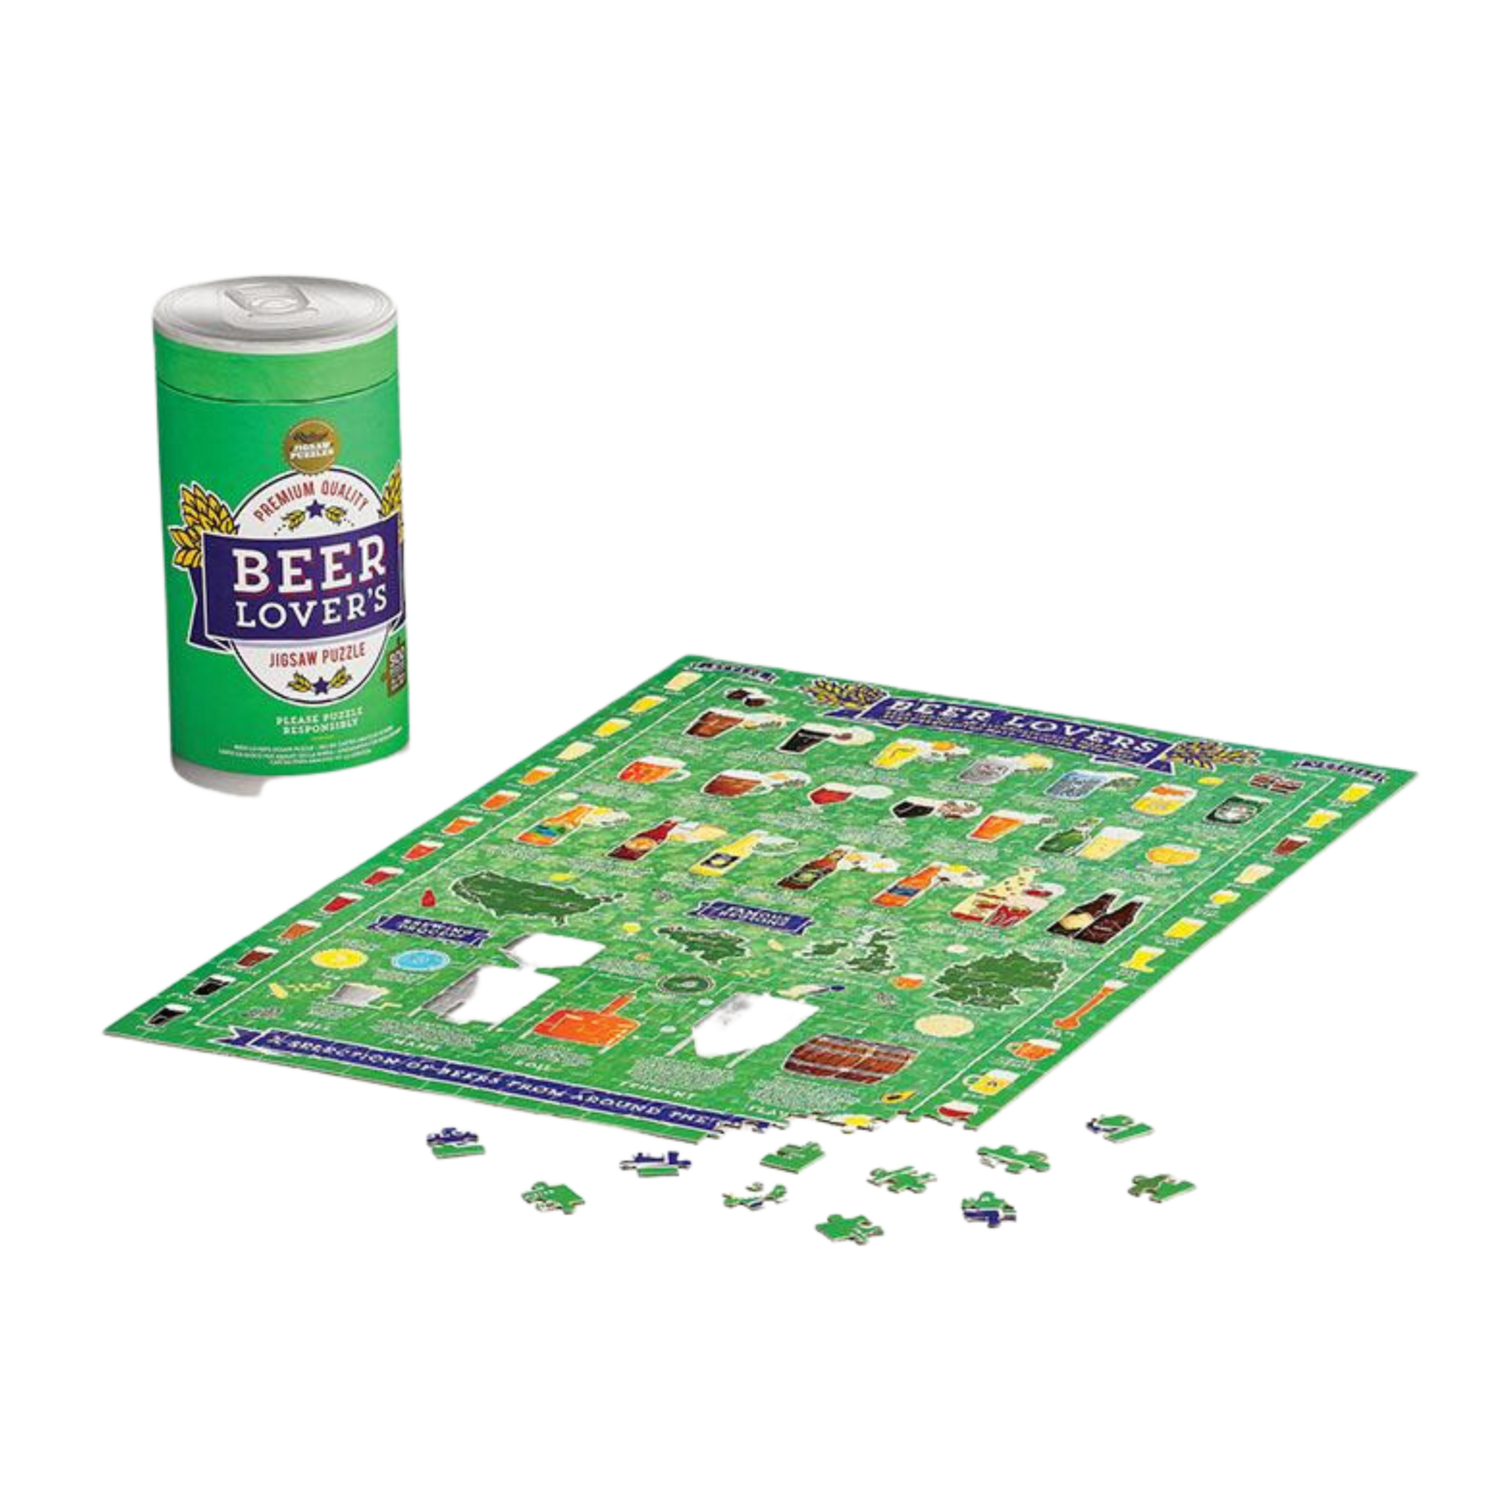 BEER LOVERS 500 PC PUZZLE